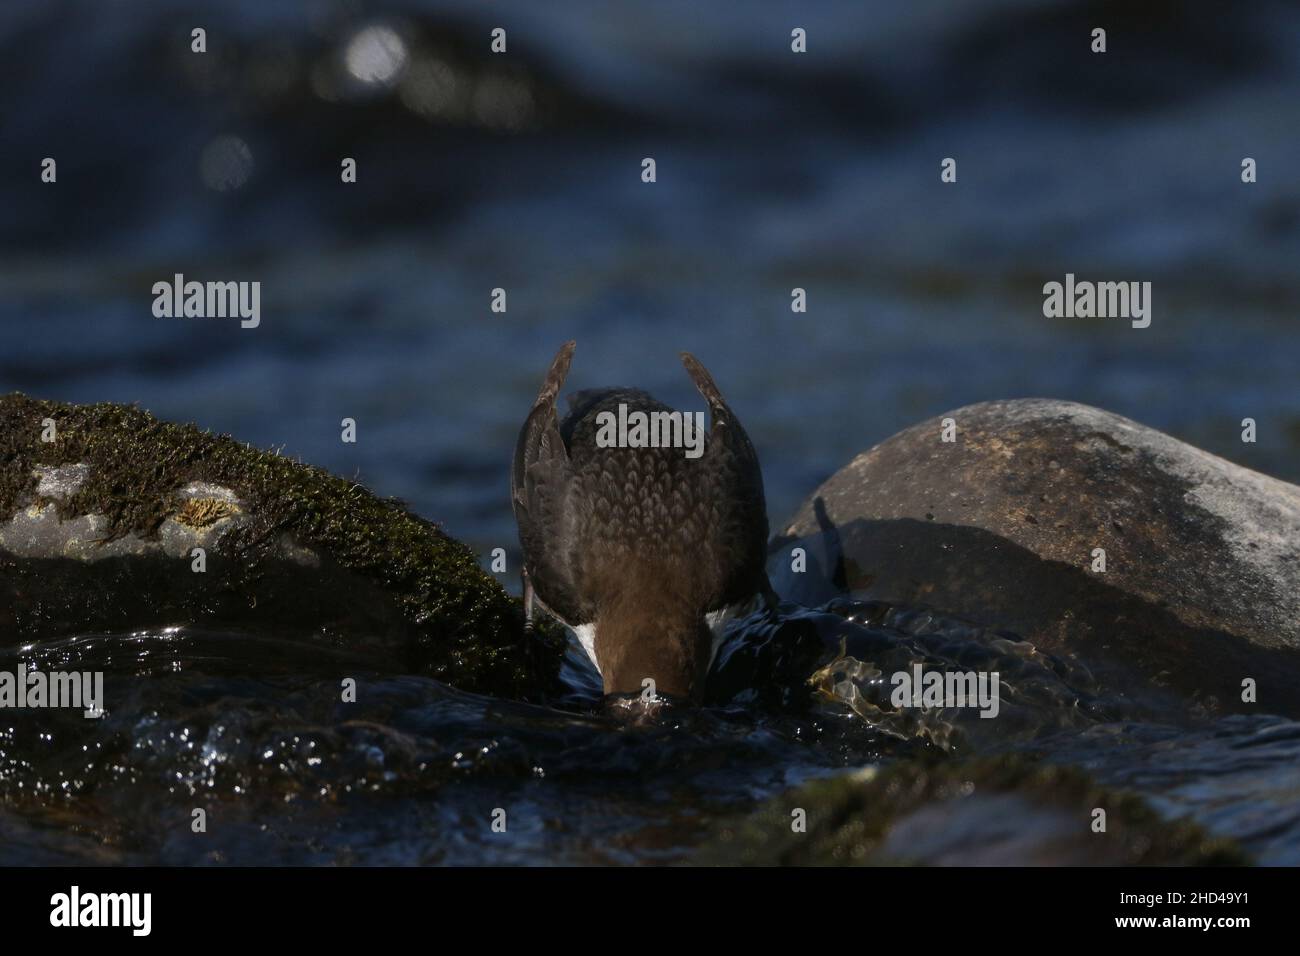 A dipper searching for prey underwater before jumping in to feed on fish or insects . Completely immerses itself to search for prey under stones. Stock Photo